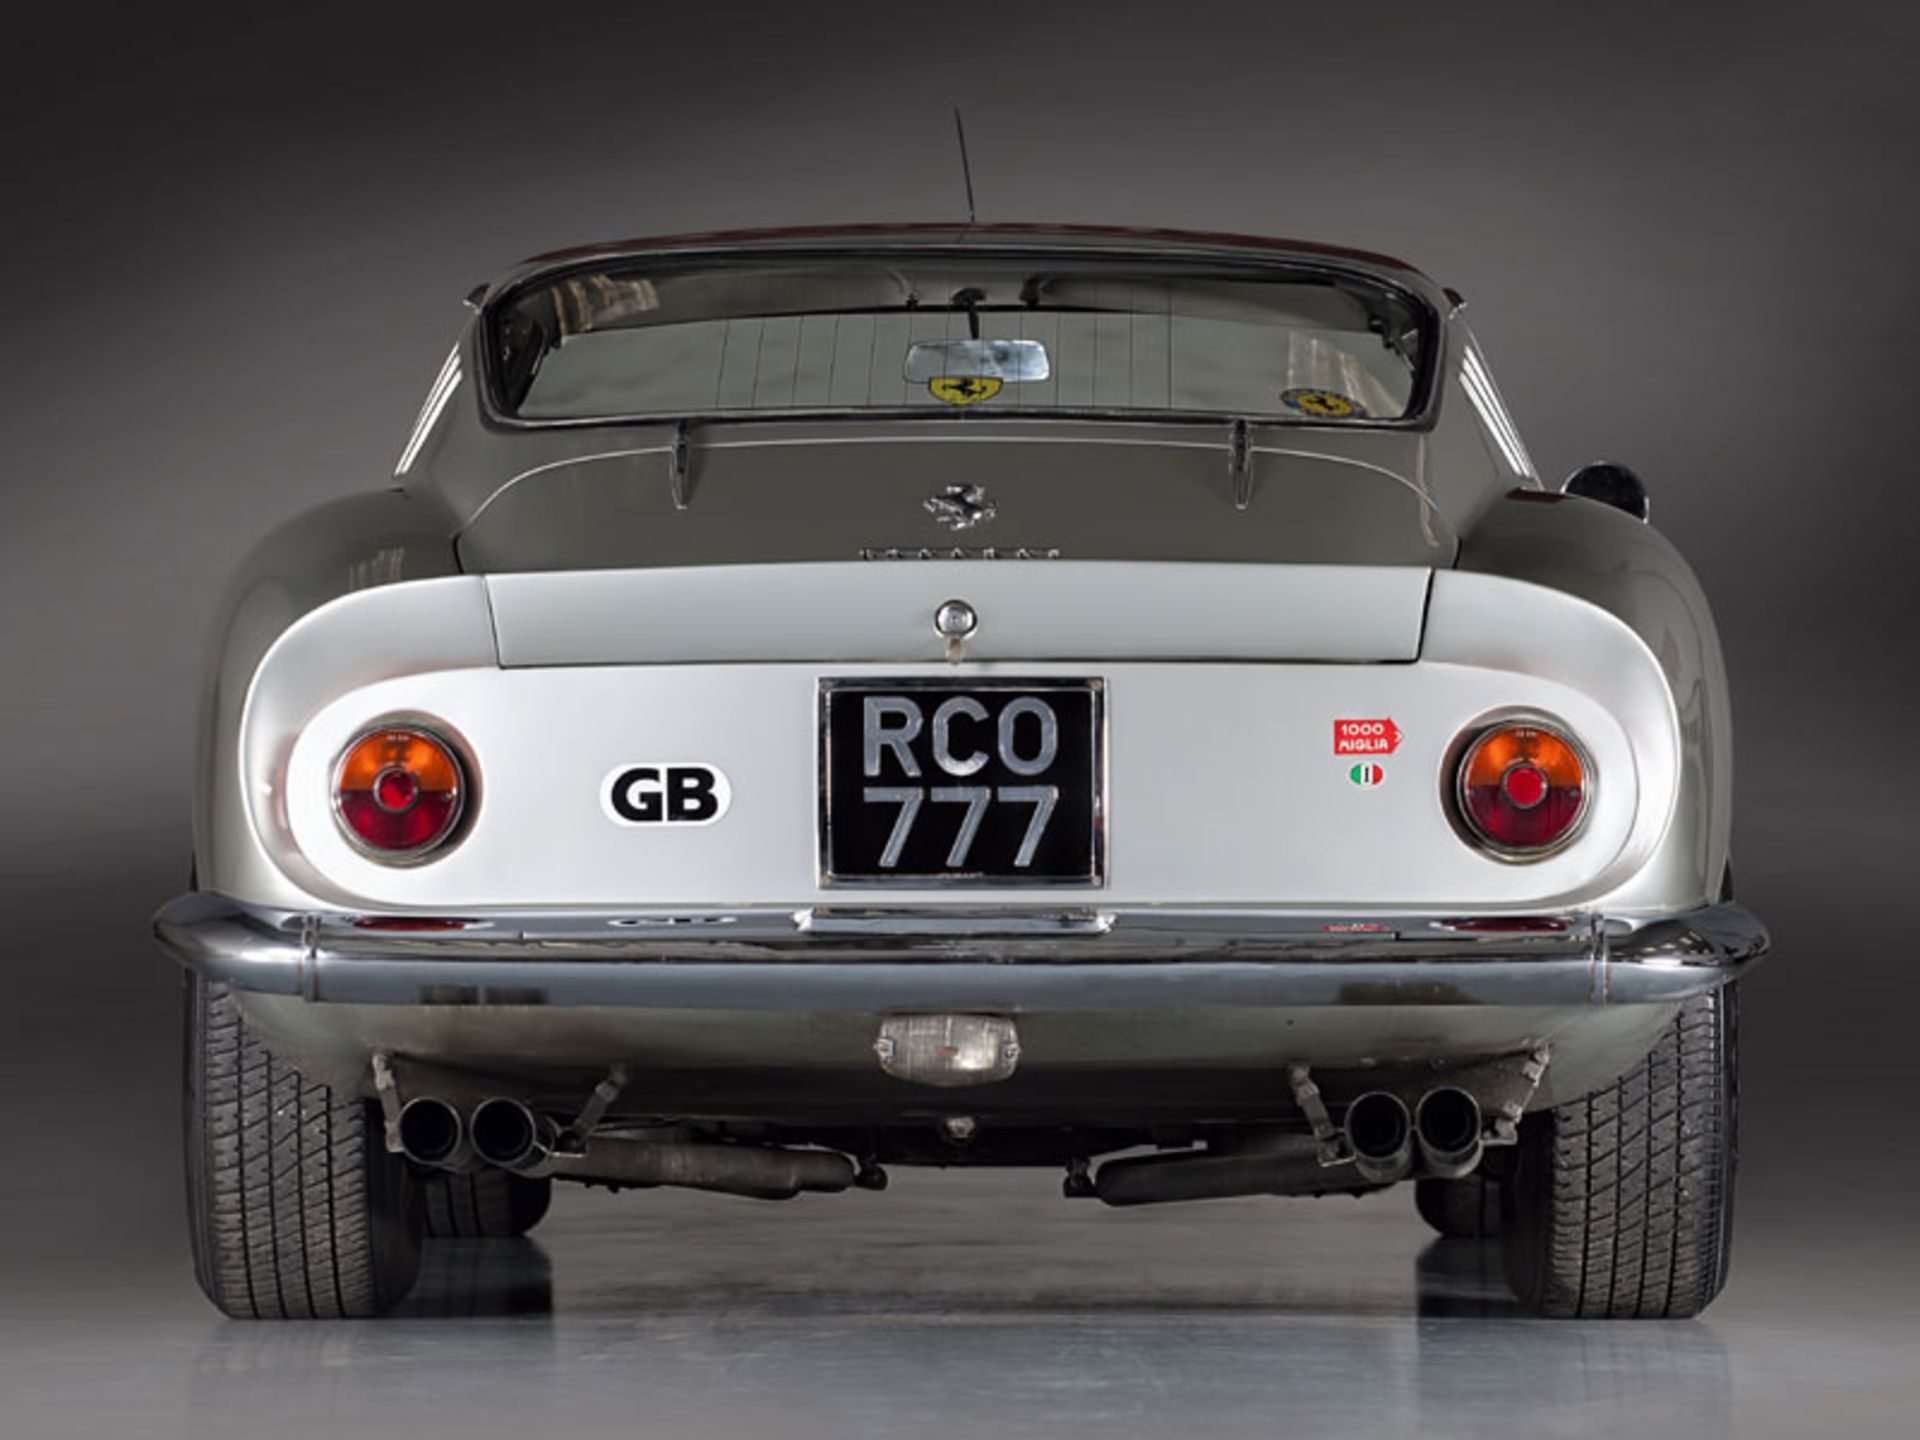 Registering to Bid on the Ferrari 275 GTB/4 from the Richard Colton Collection:
- All Registrations - Image 3 of 10